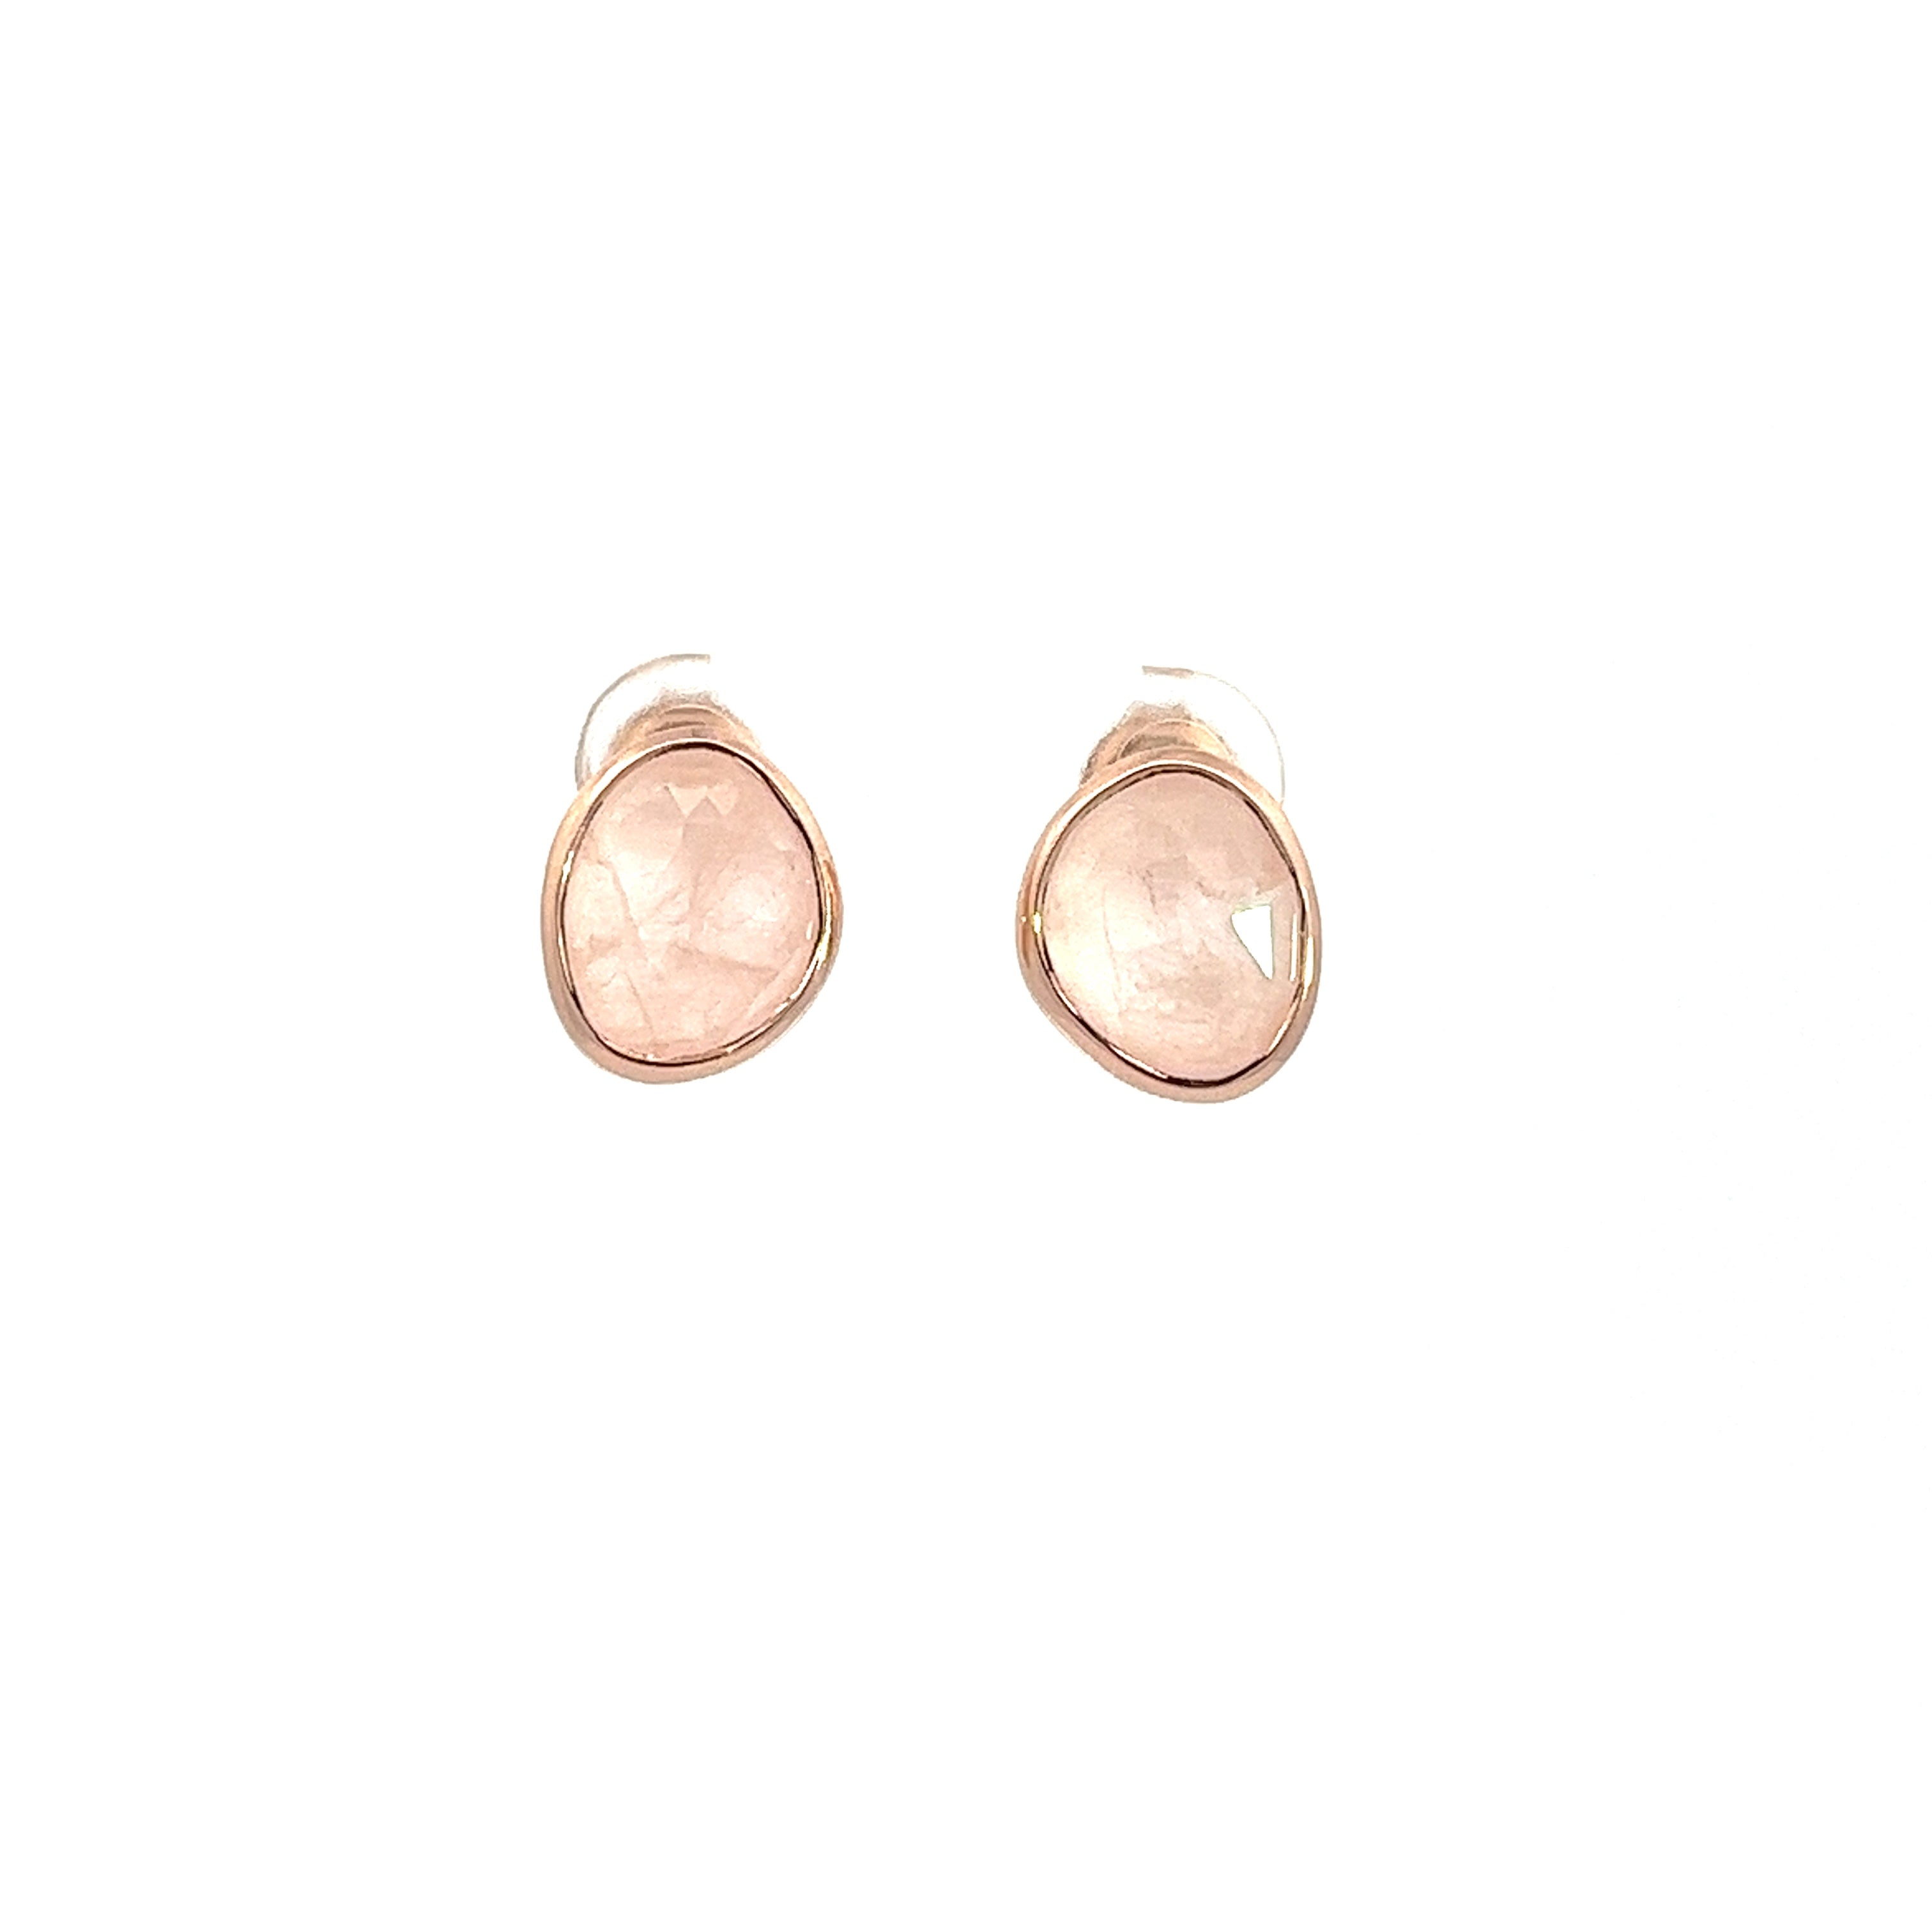 UNEVEN ROSE QUARTZ EARRINGS SET IN 925 SILVER ROSE GOLD PLATED